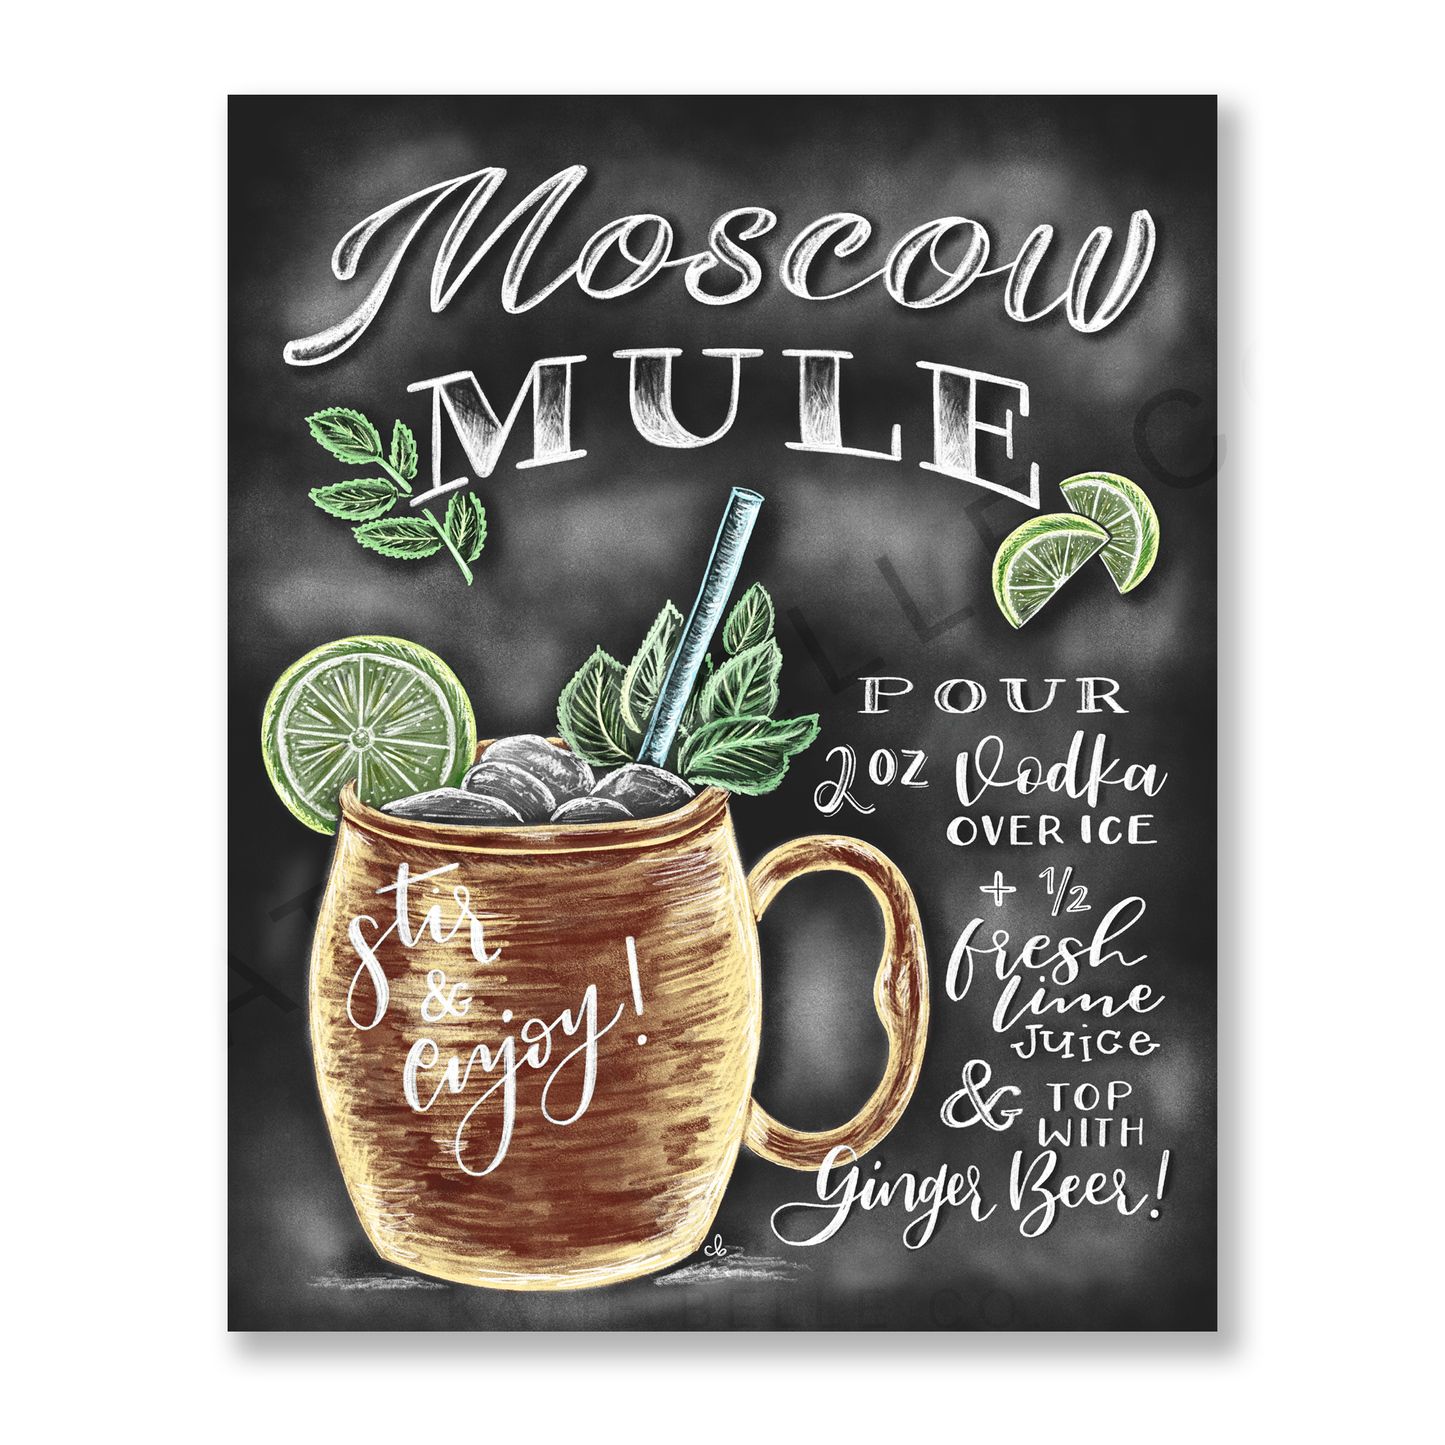 Moscow Mule. Moscow Mule Recipe. Chalk Art. Chalkboard Print. Stir and enjoy. limes. mint leaves. copper mug. ginger beer. 8 x 10 print. 5 x 7 print. unframed art. Heavy matte paper. Vibrant colors. 